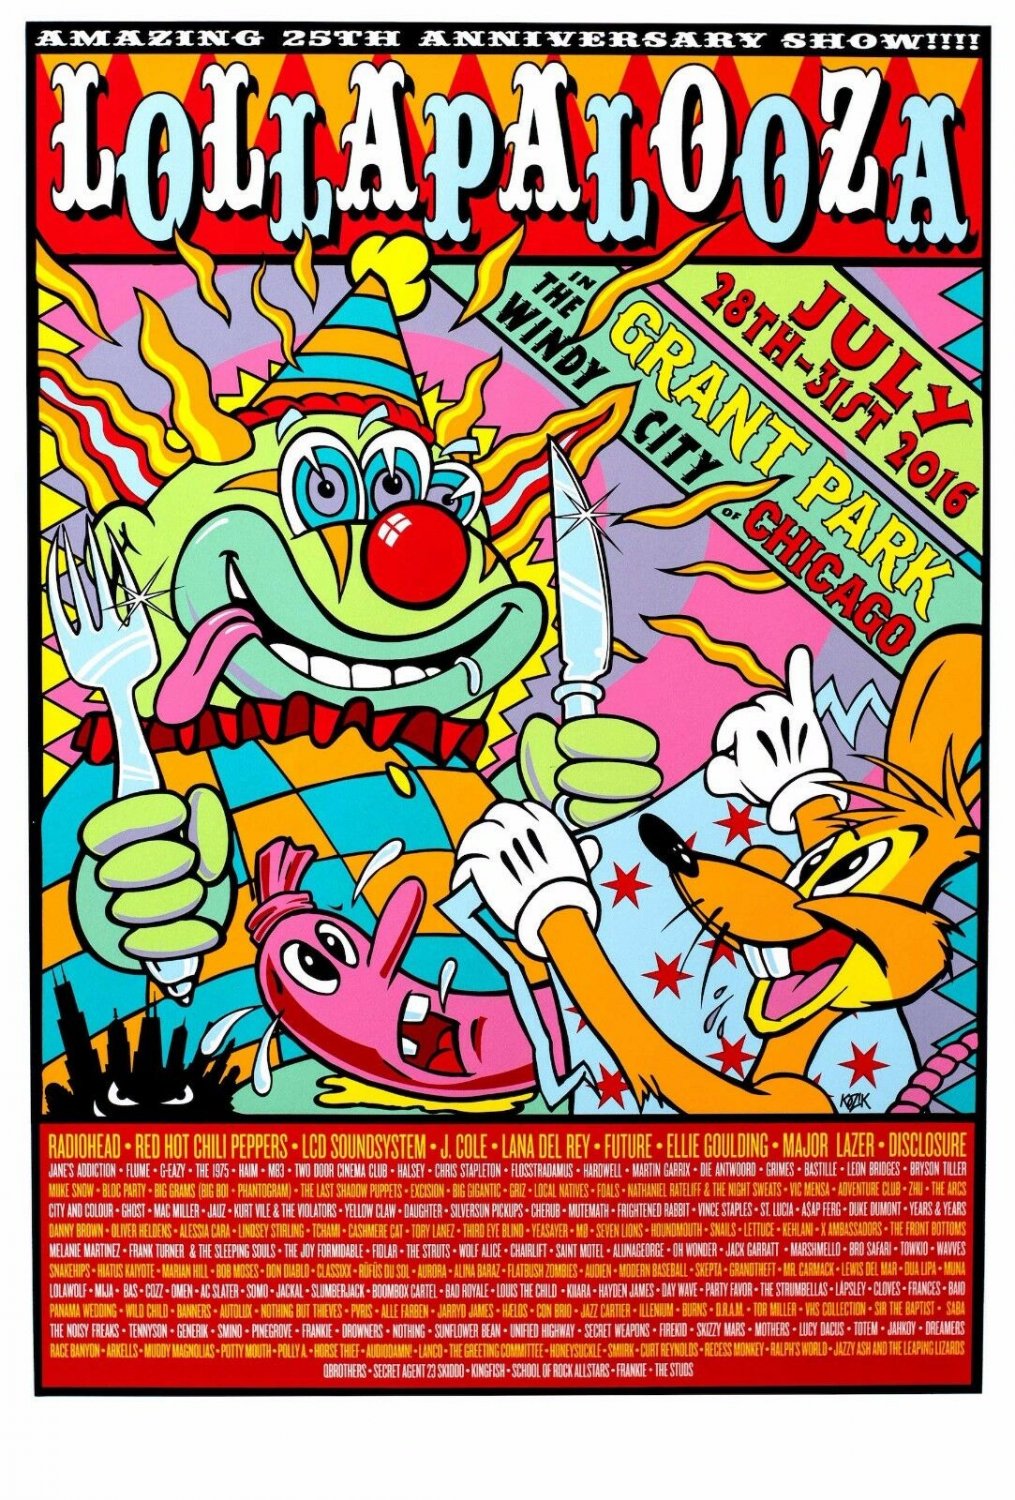 Lollapalooza  Poster 13x19 inches G